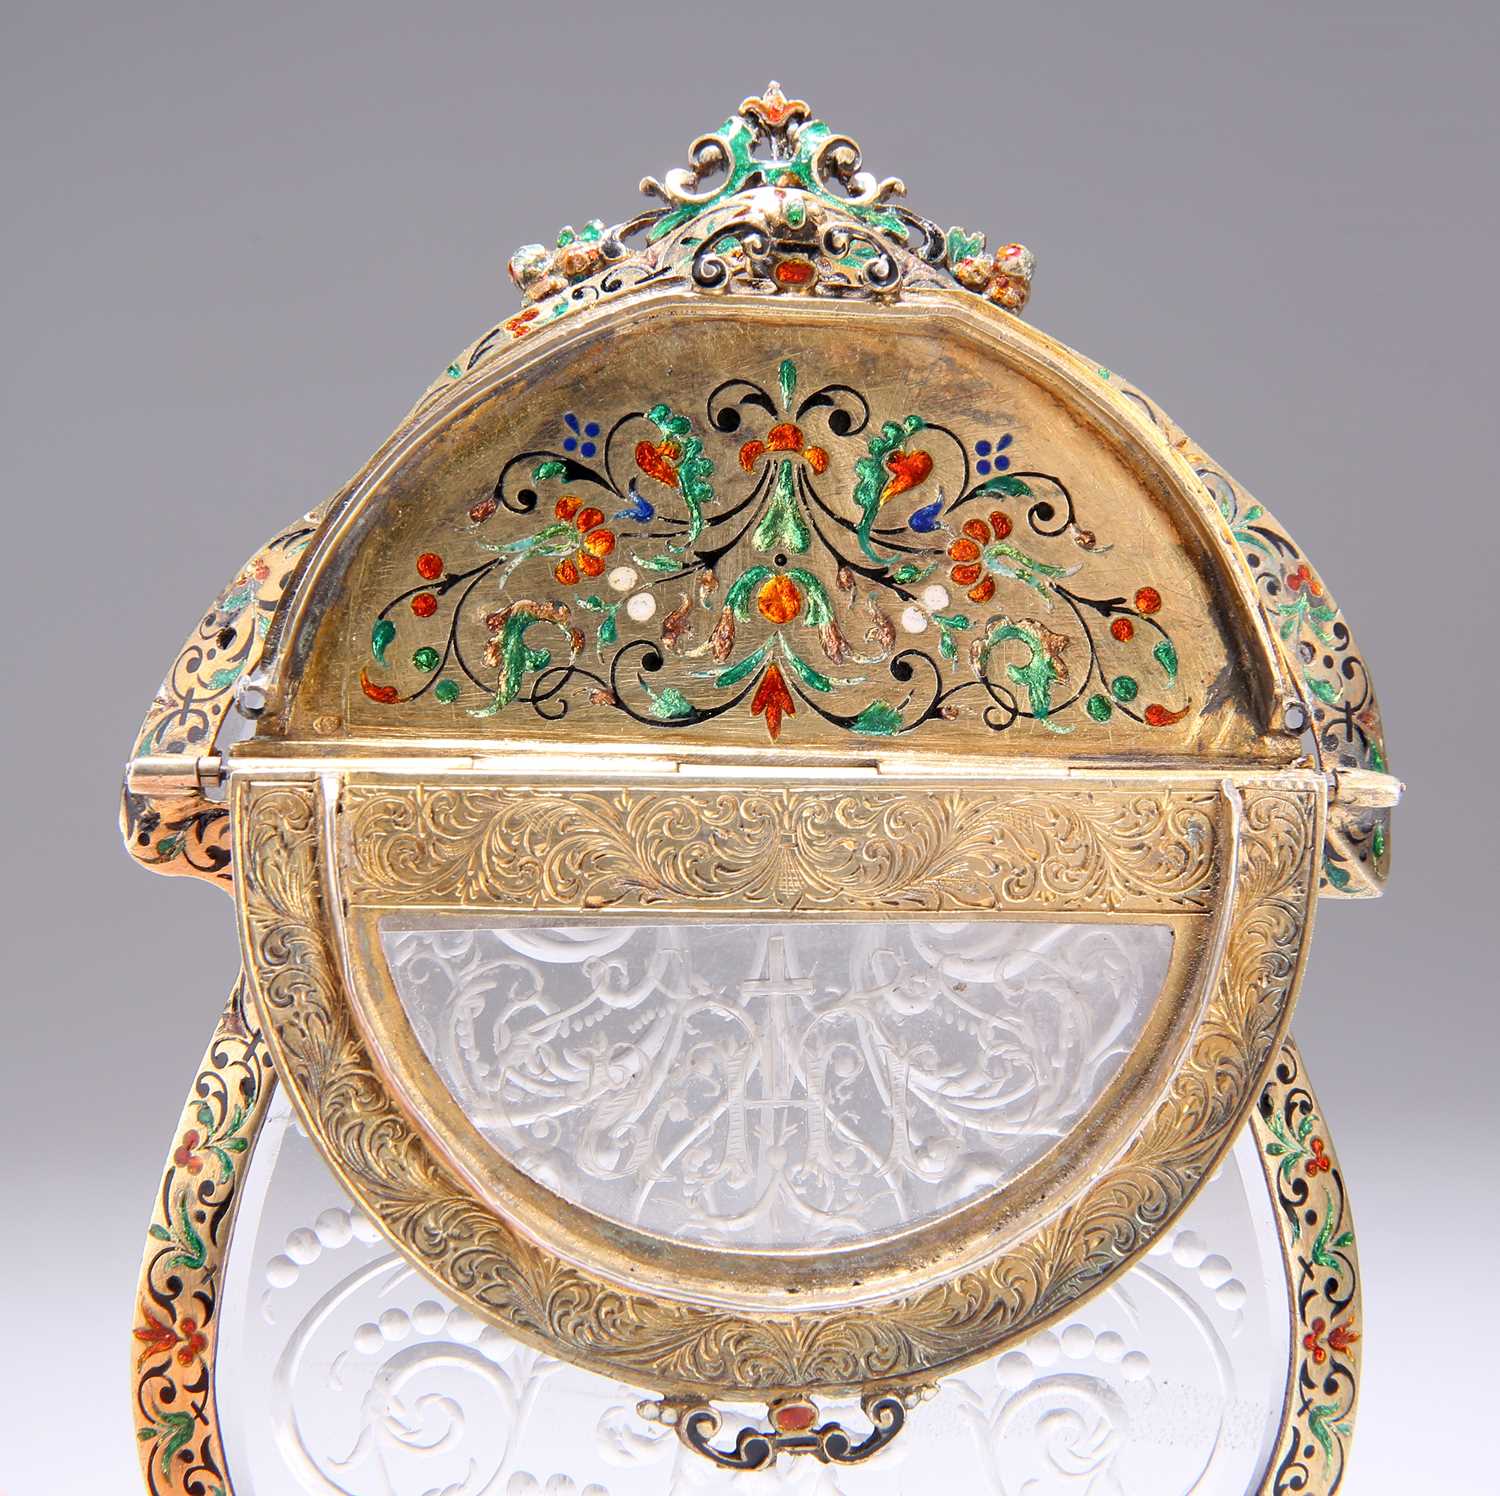 A VIENNESE ENAMEL AND ROCK CRYSTAL TRAVELLING ALTAR, BY HERMANN RATZERSDORFER, VIENNA, CIRCA 1890 - Image 4 of 4